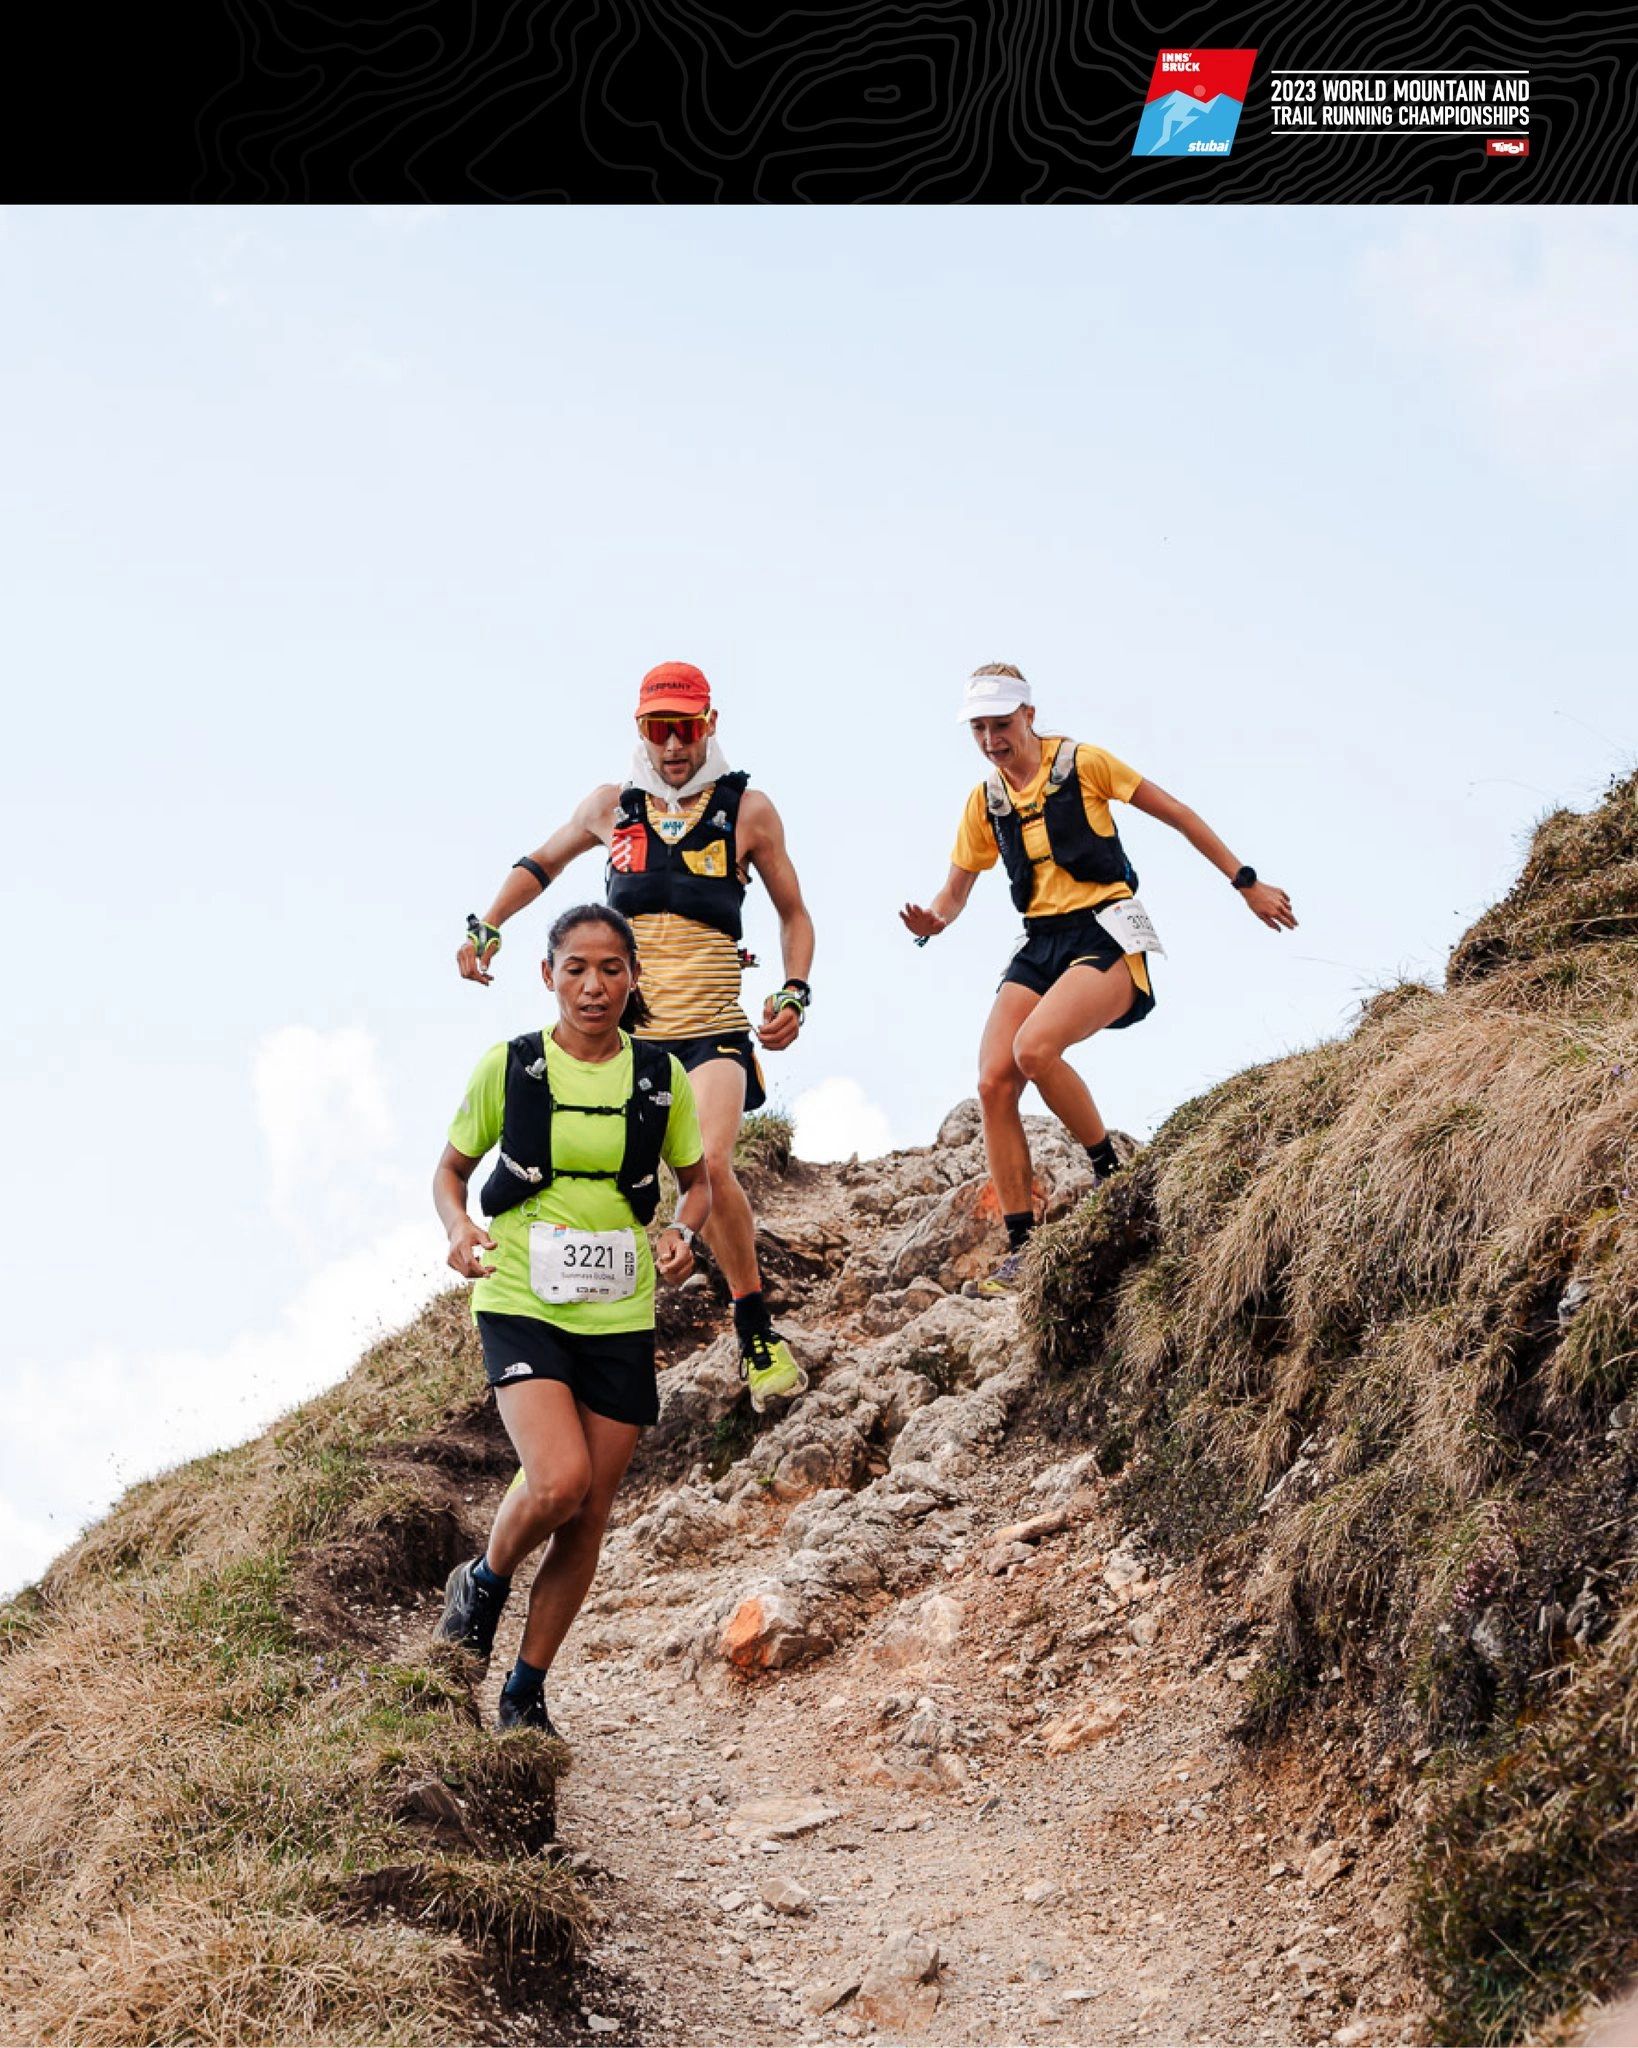 The World Mountain and Trail Running Championship 2023